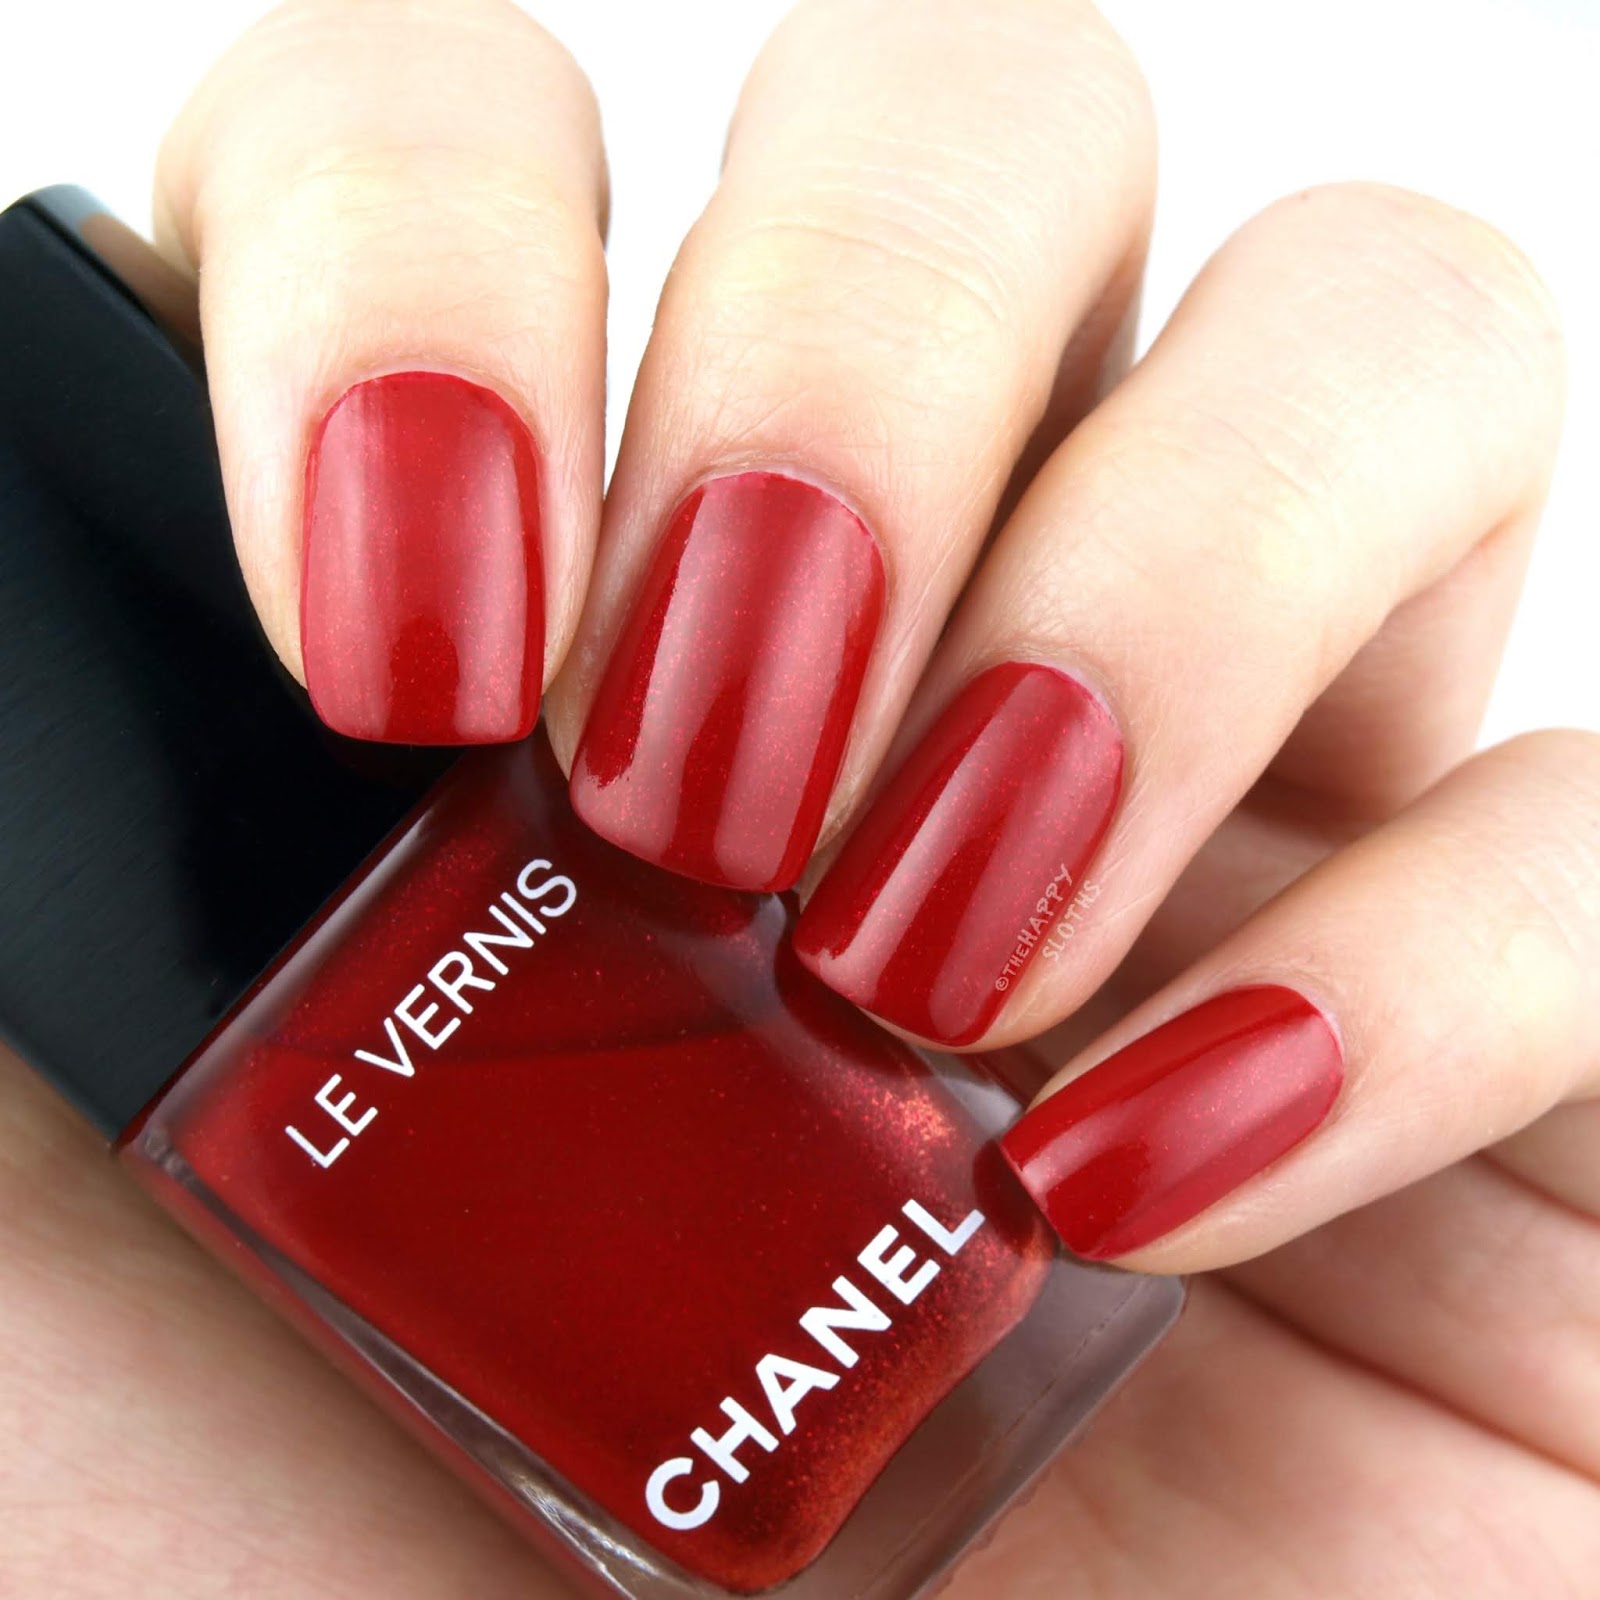 Chanel Holiday 2018 | Le Vernis in "918 Flamboyance": Review and Swatches